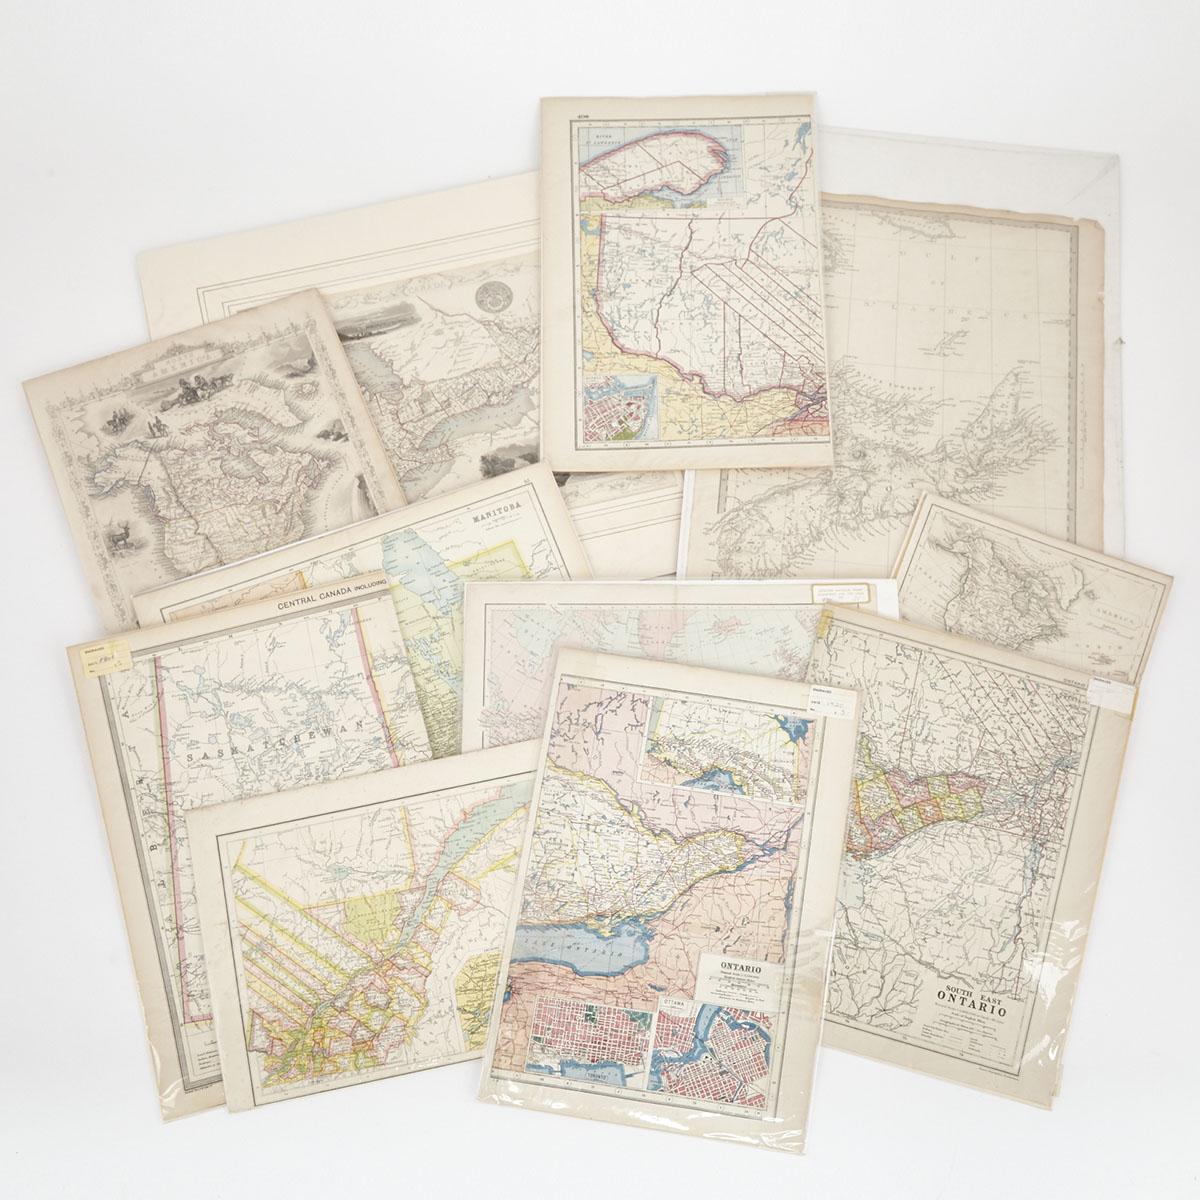 Collection of Eleven Maps of North America, Canada West, and the Canadian Provinces, 19th and early 20th century